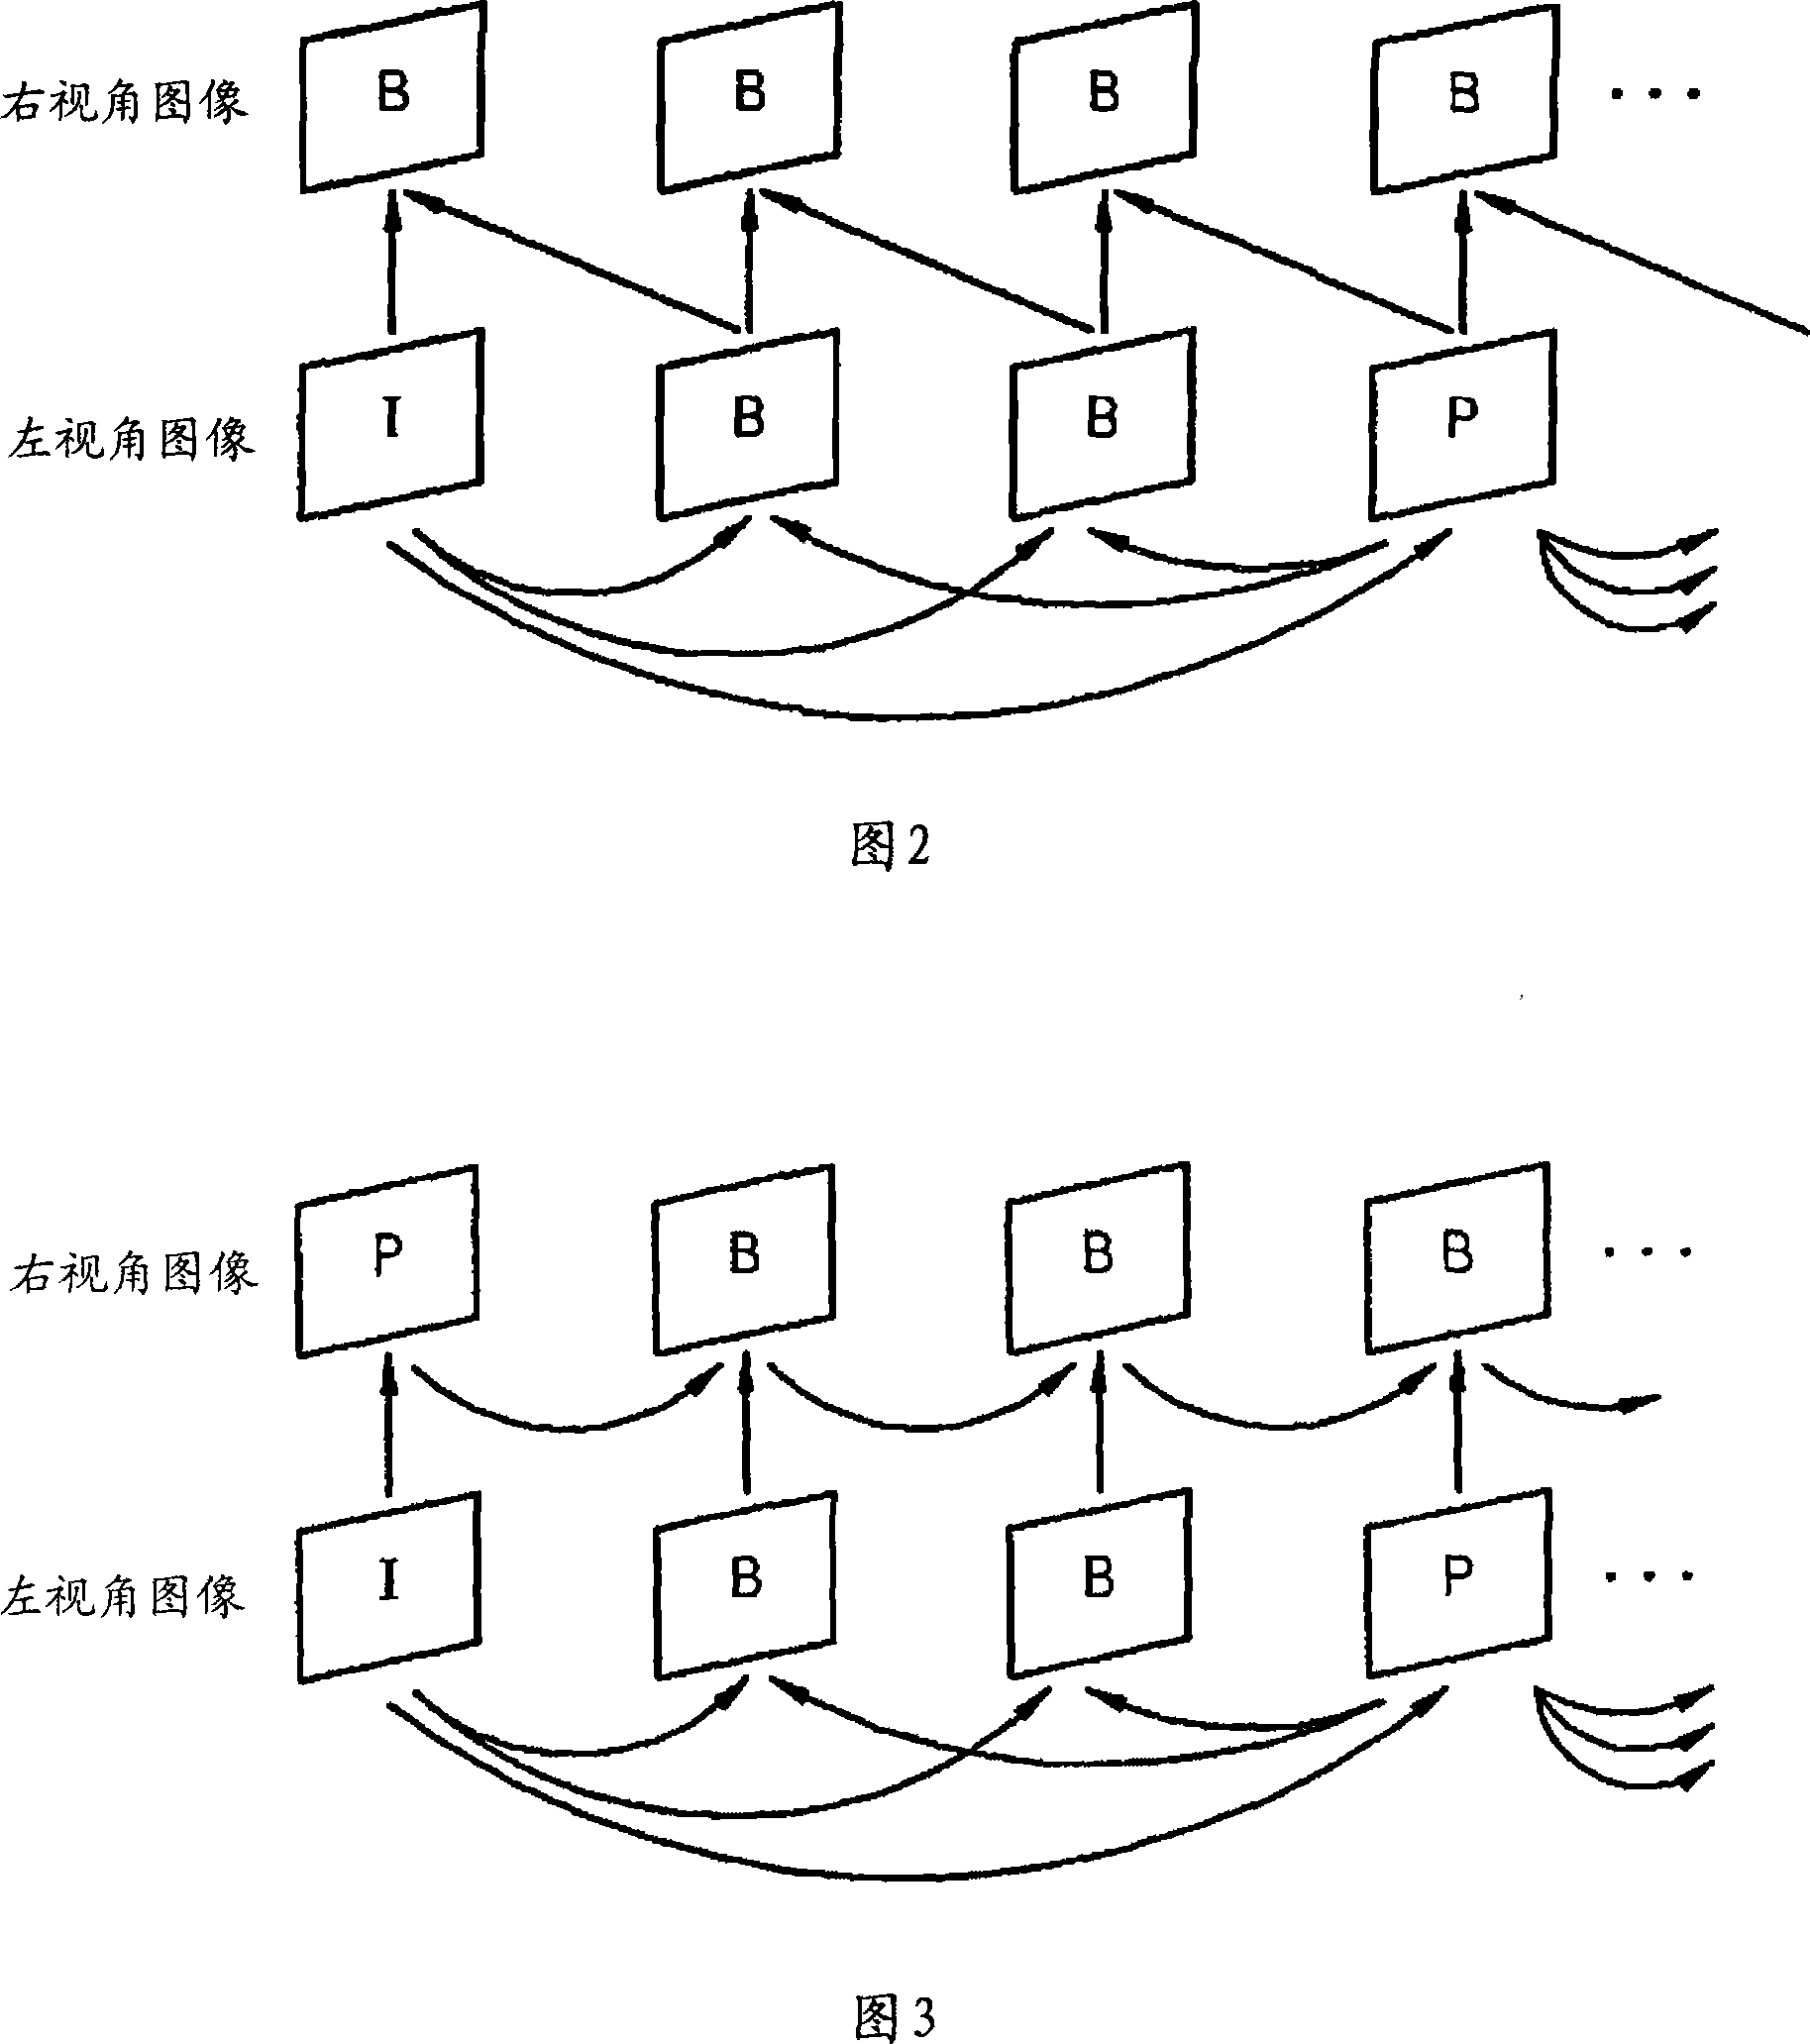 Method of estimating disparity vector, and method and apparatus for encoding and decoding multi-view moving picture using the disparity vector estimation method